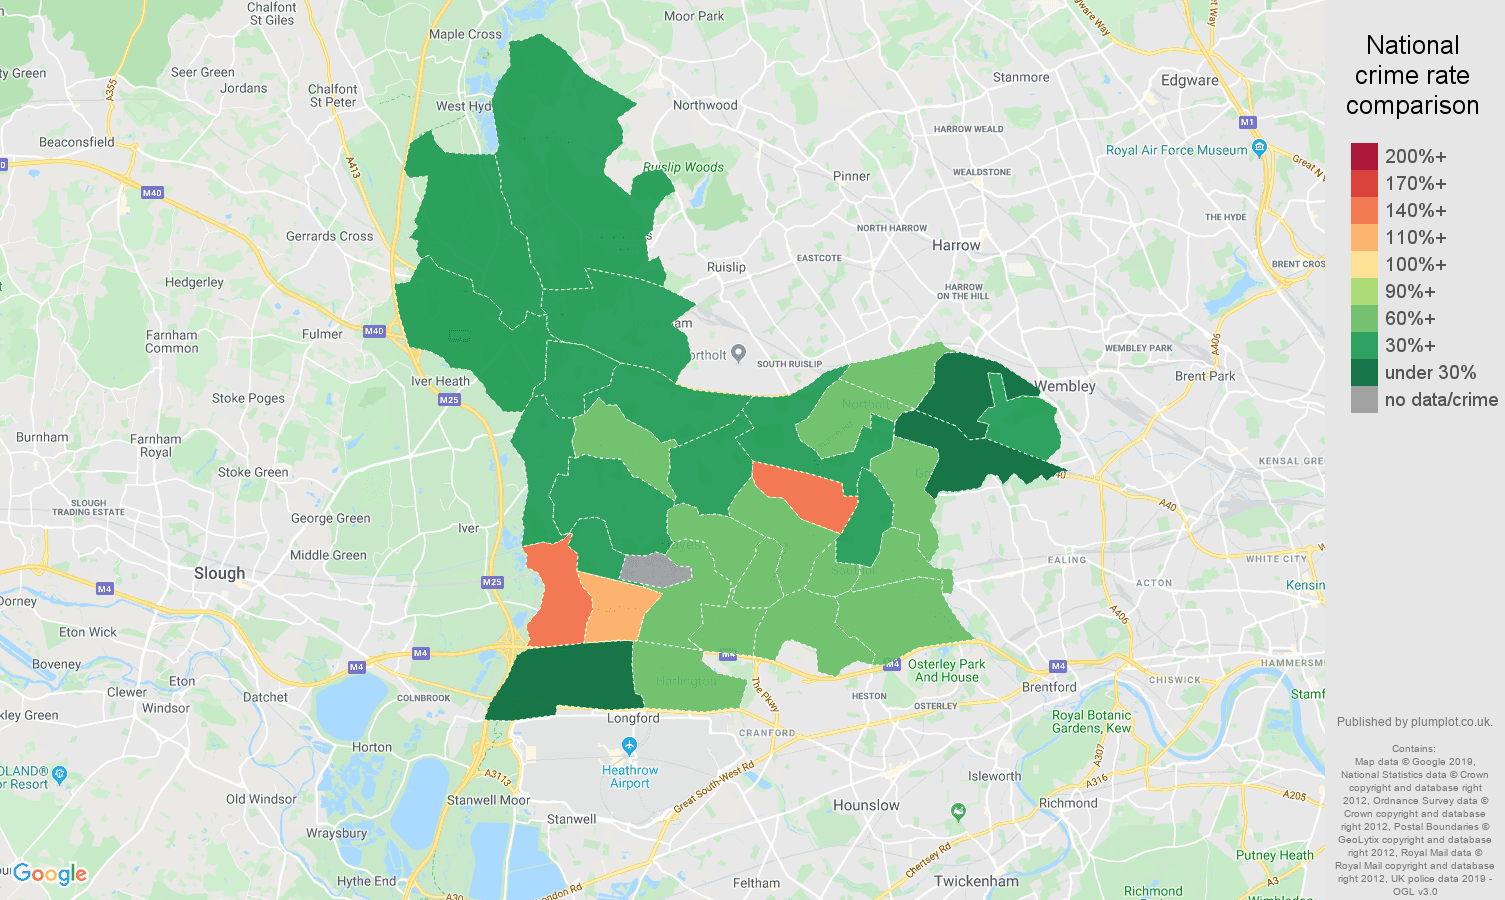 Southall other crime rate comparison map